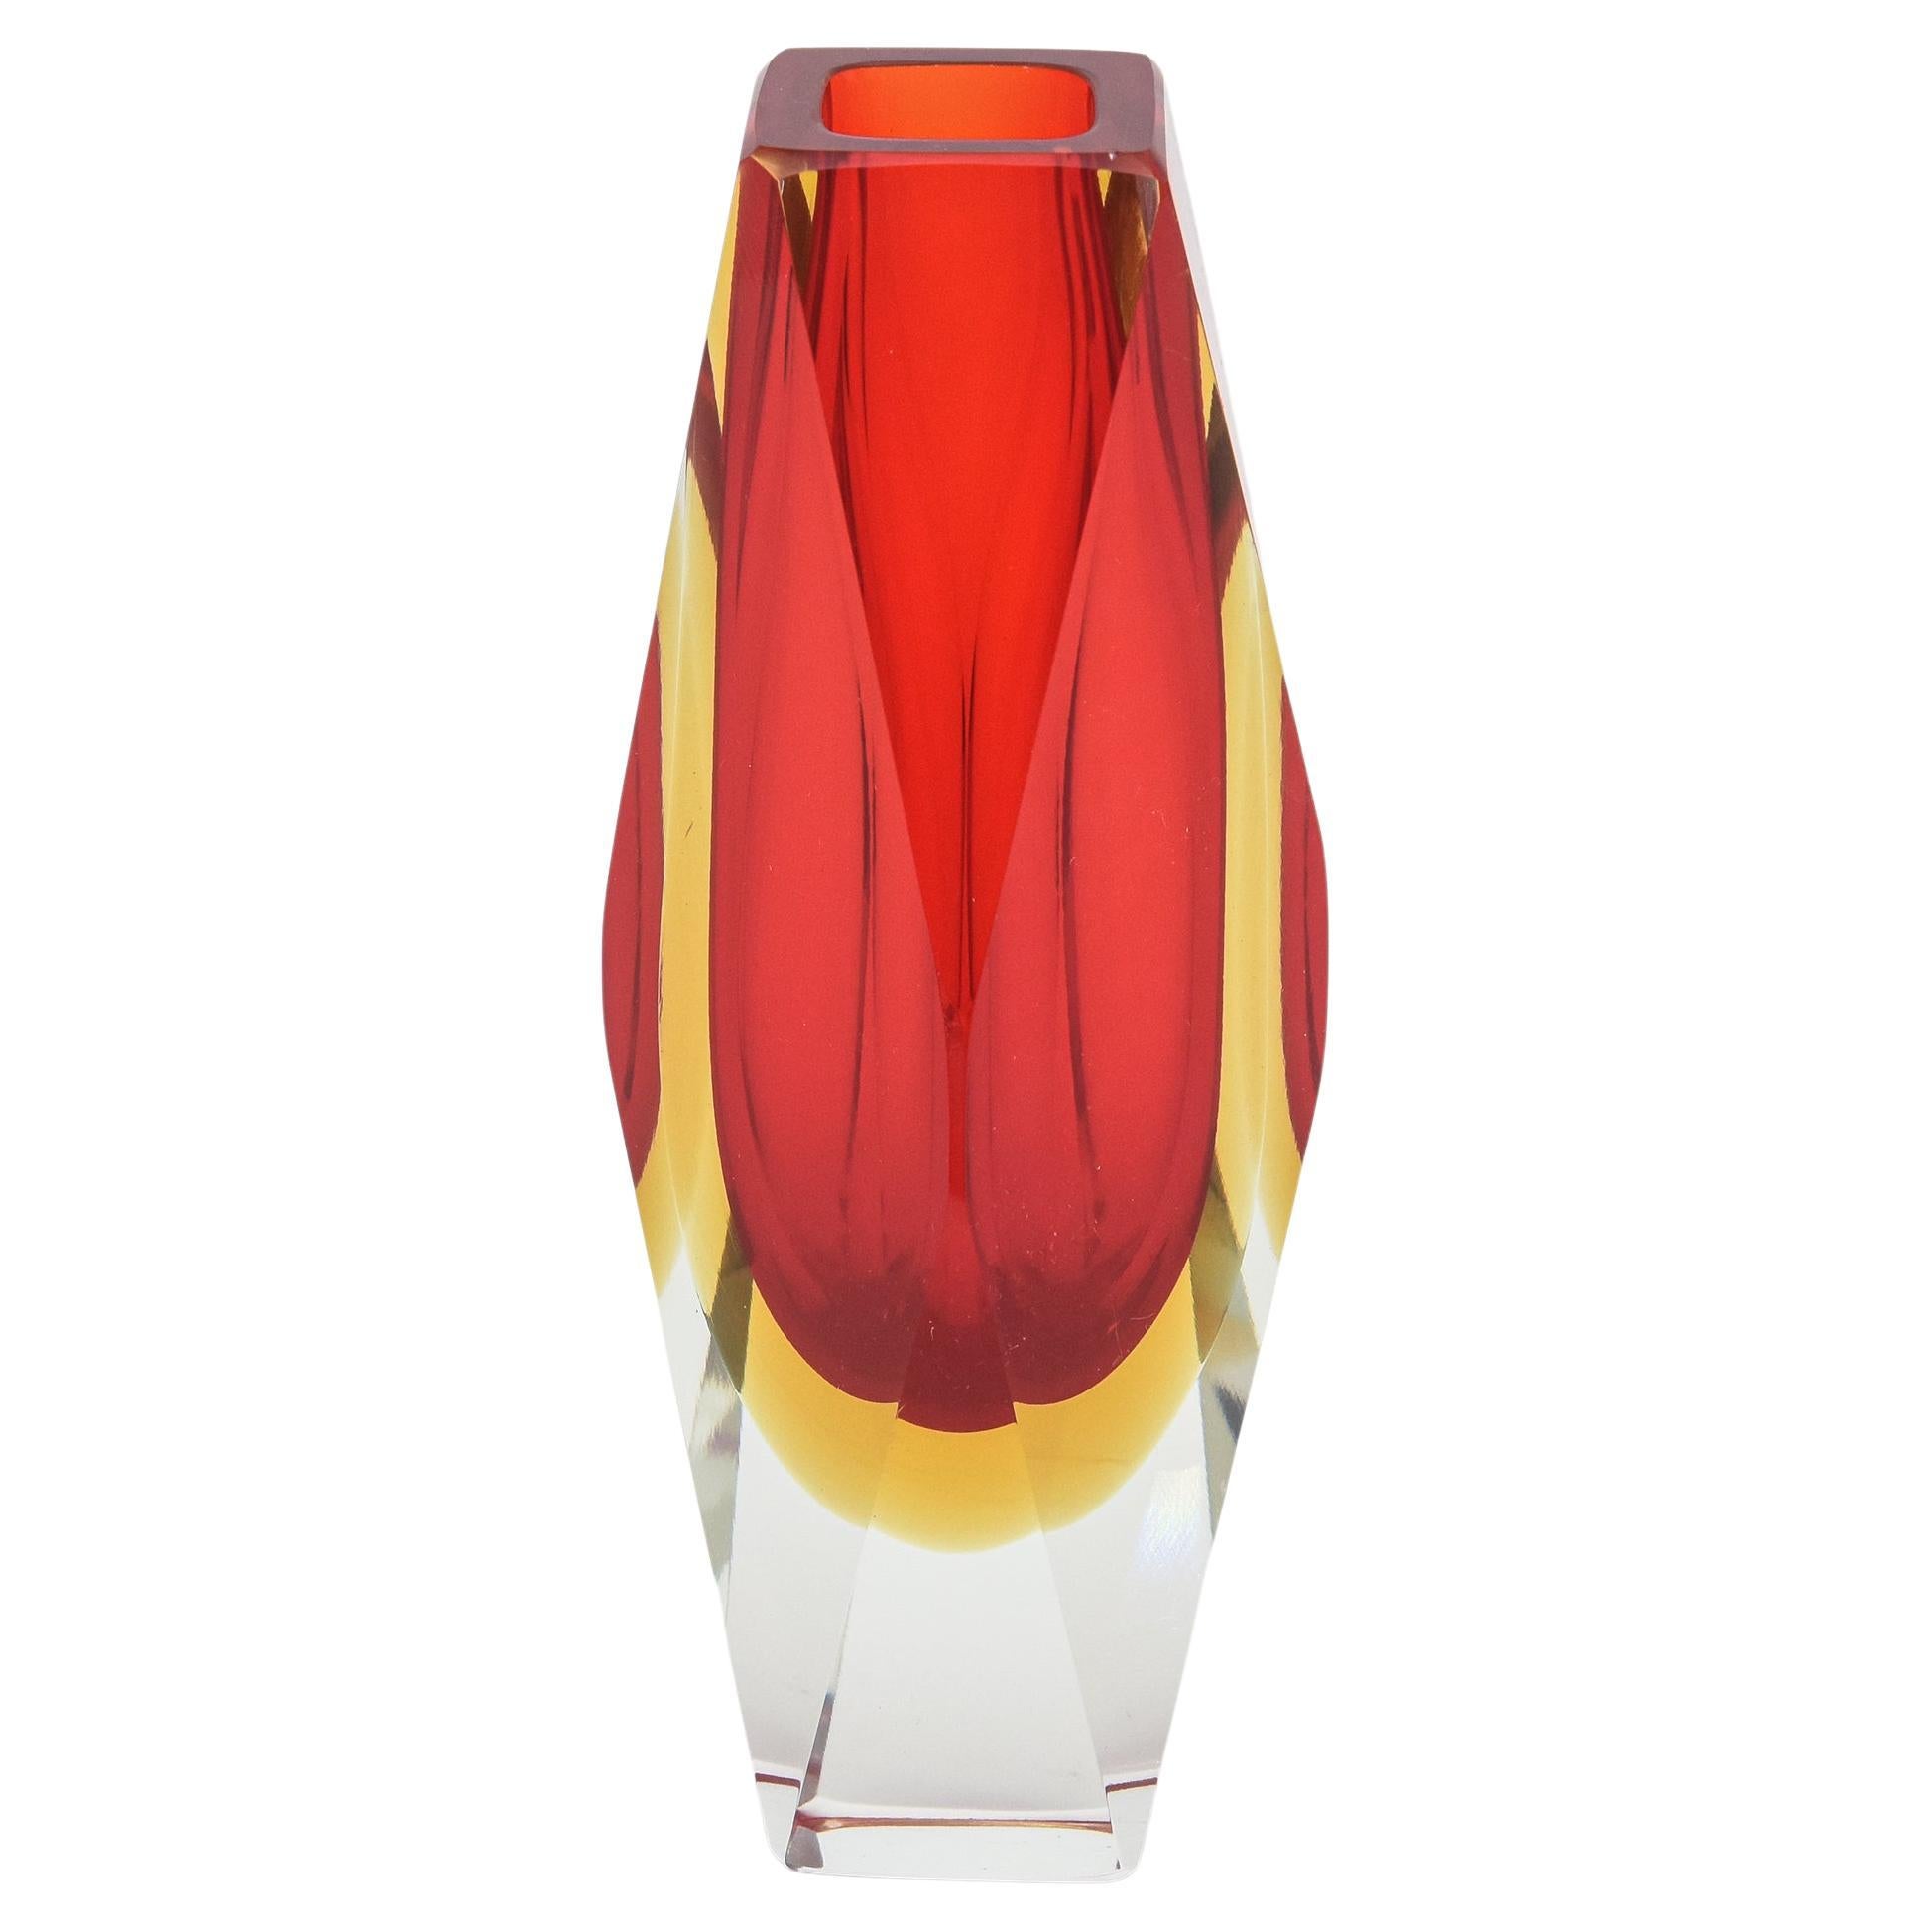 Mandruzzato Vintage Murano Red and Yellow Sommerso Faceted Glass Vase Italian